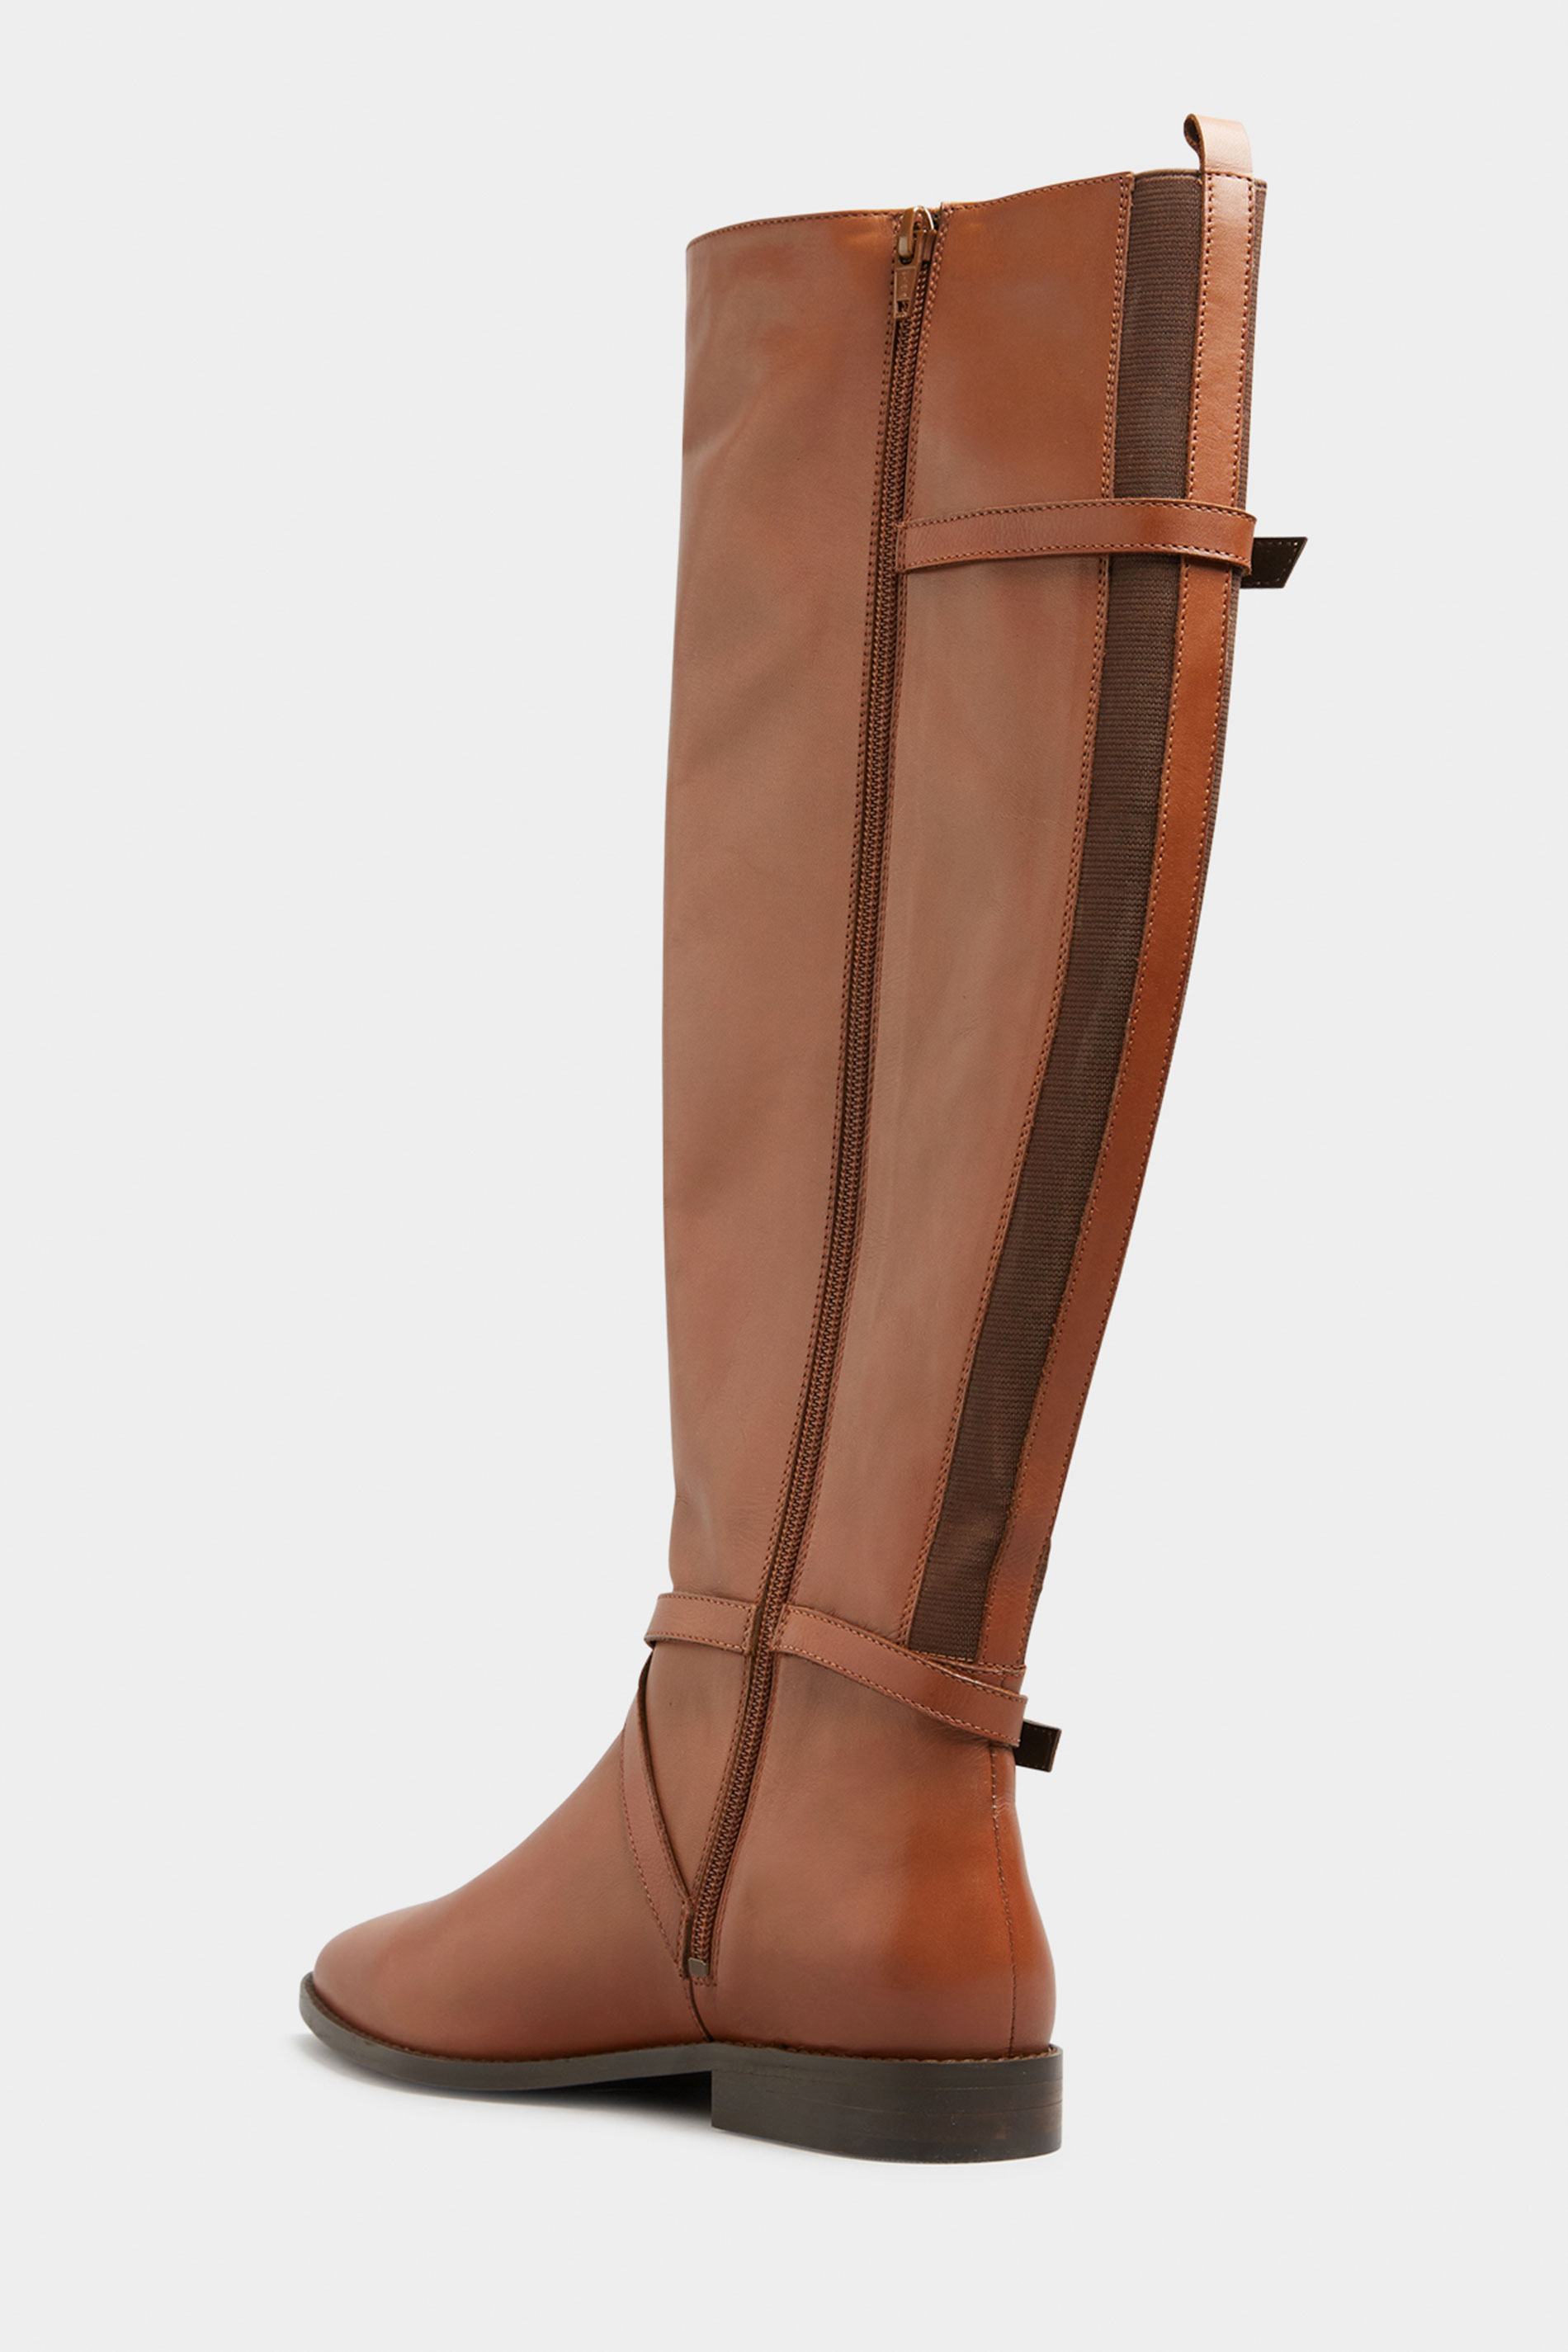 LTS Tan Brown Leather Riding Boots | Long Tall Sally 3